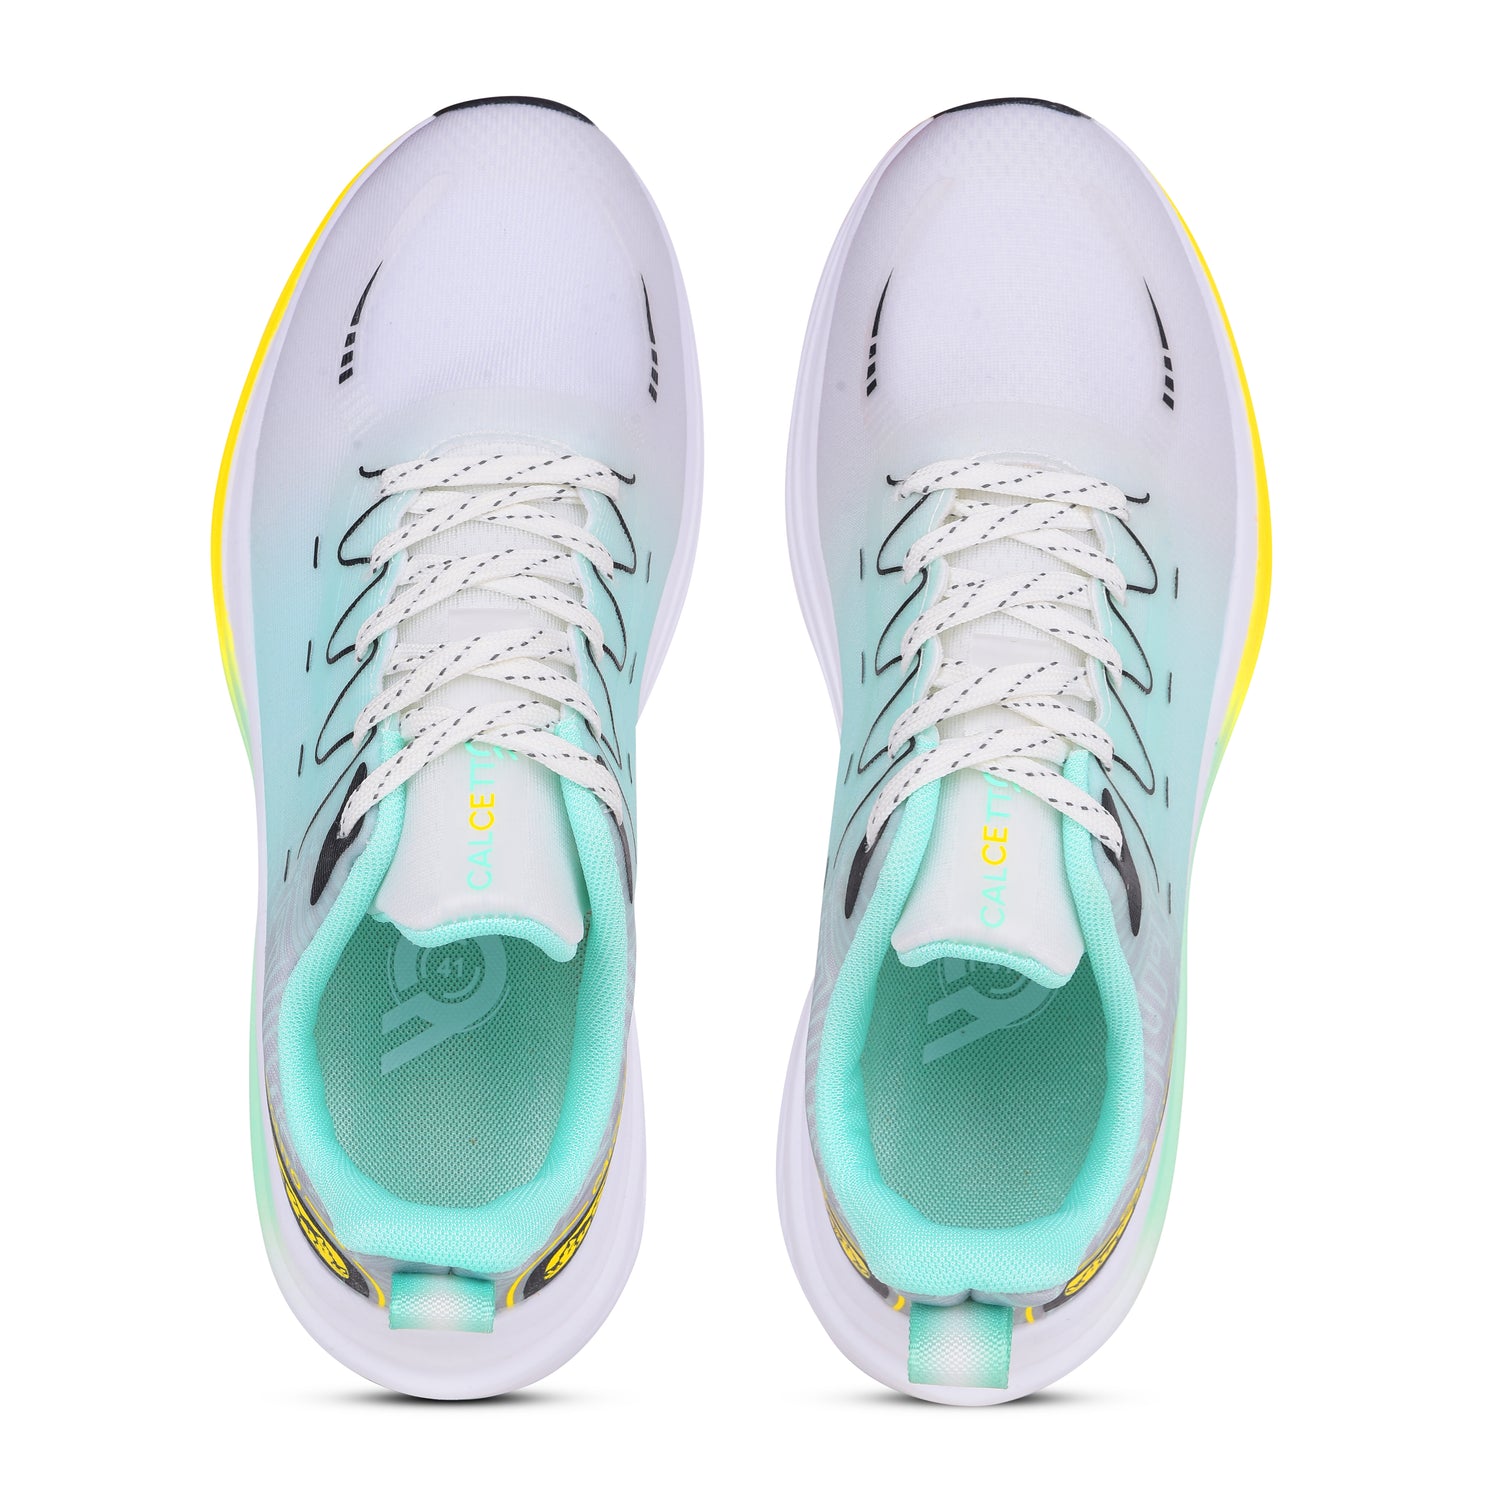 Calcetto CLT-0997 White Green Running Shoe For Men